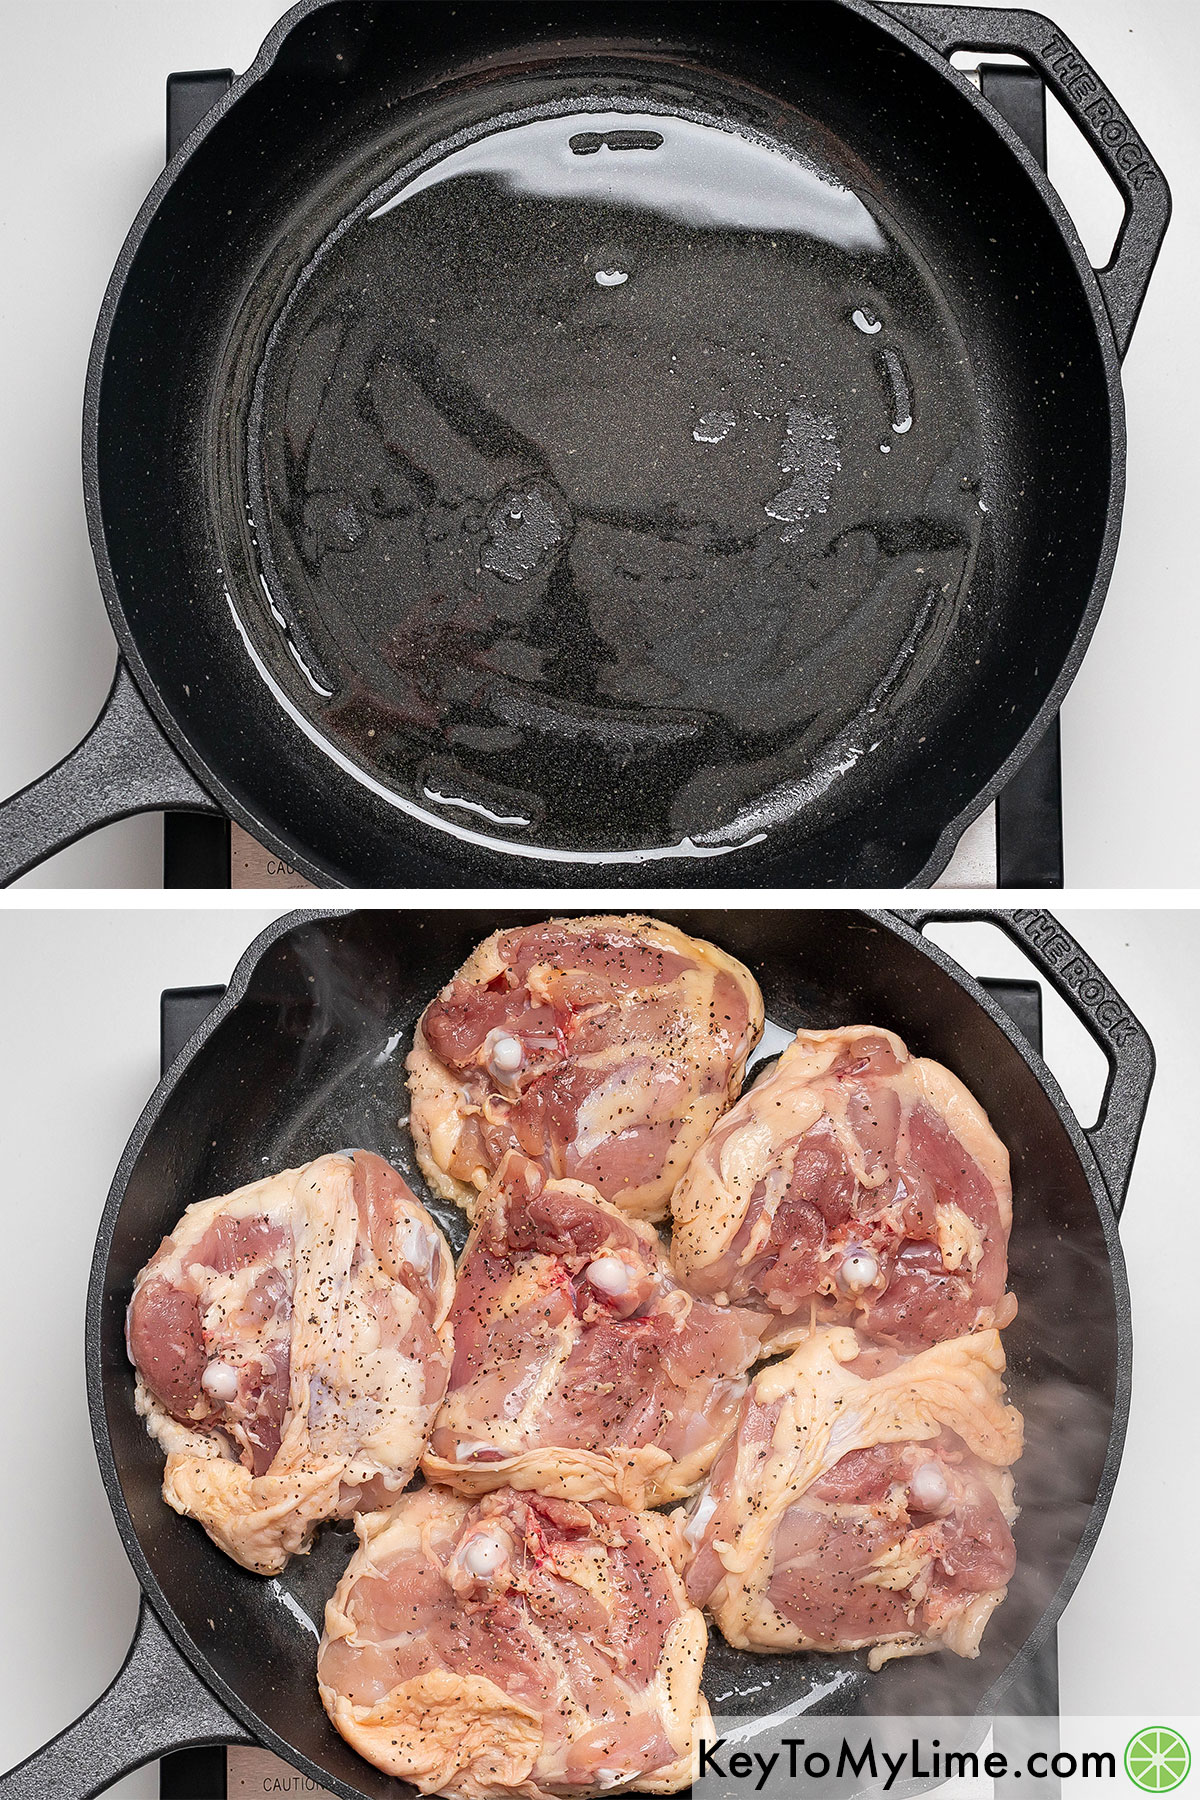 Heating oil in a cast iron skillet then once hot adding raw chicken thighs skin side down.